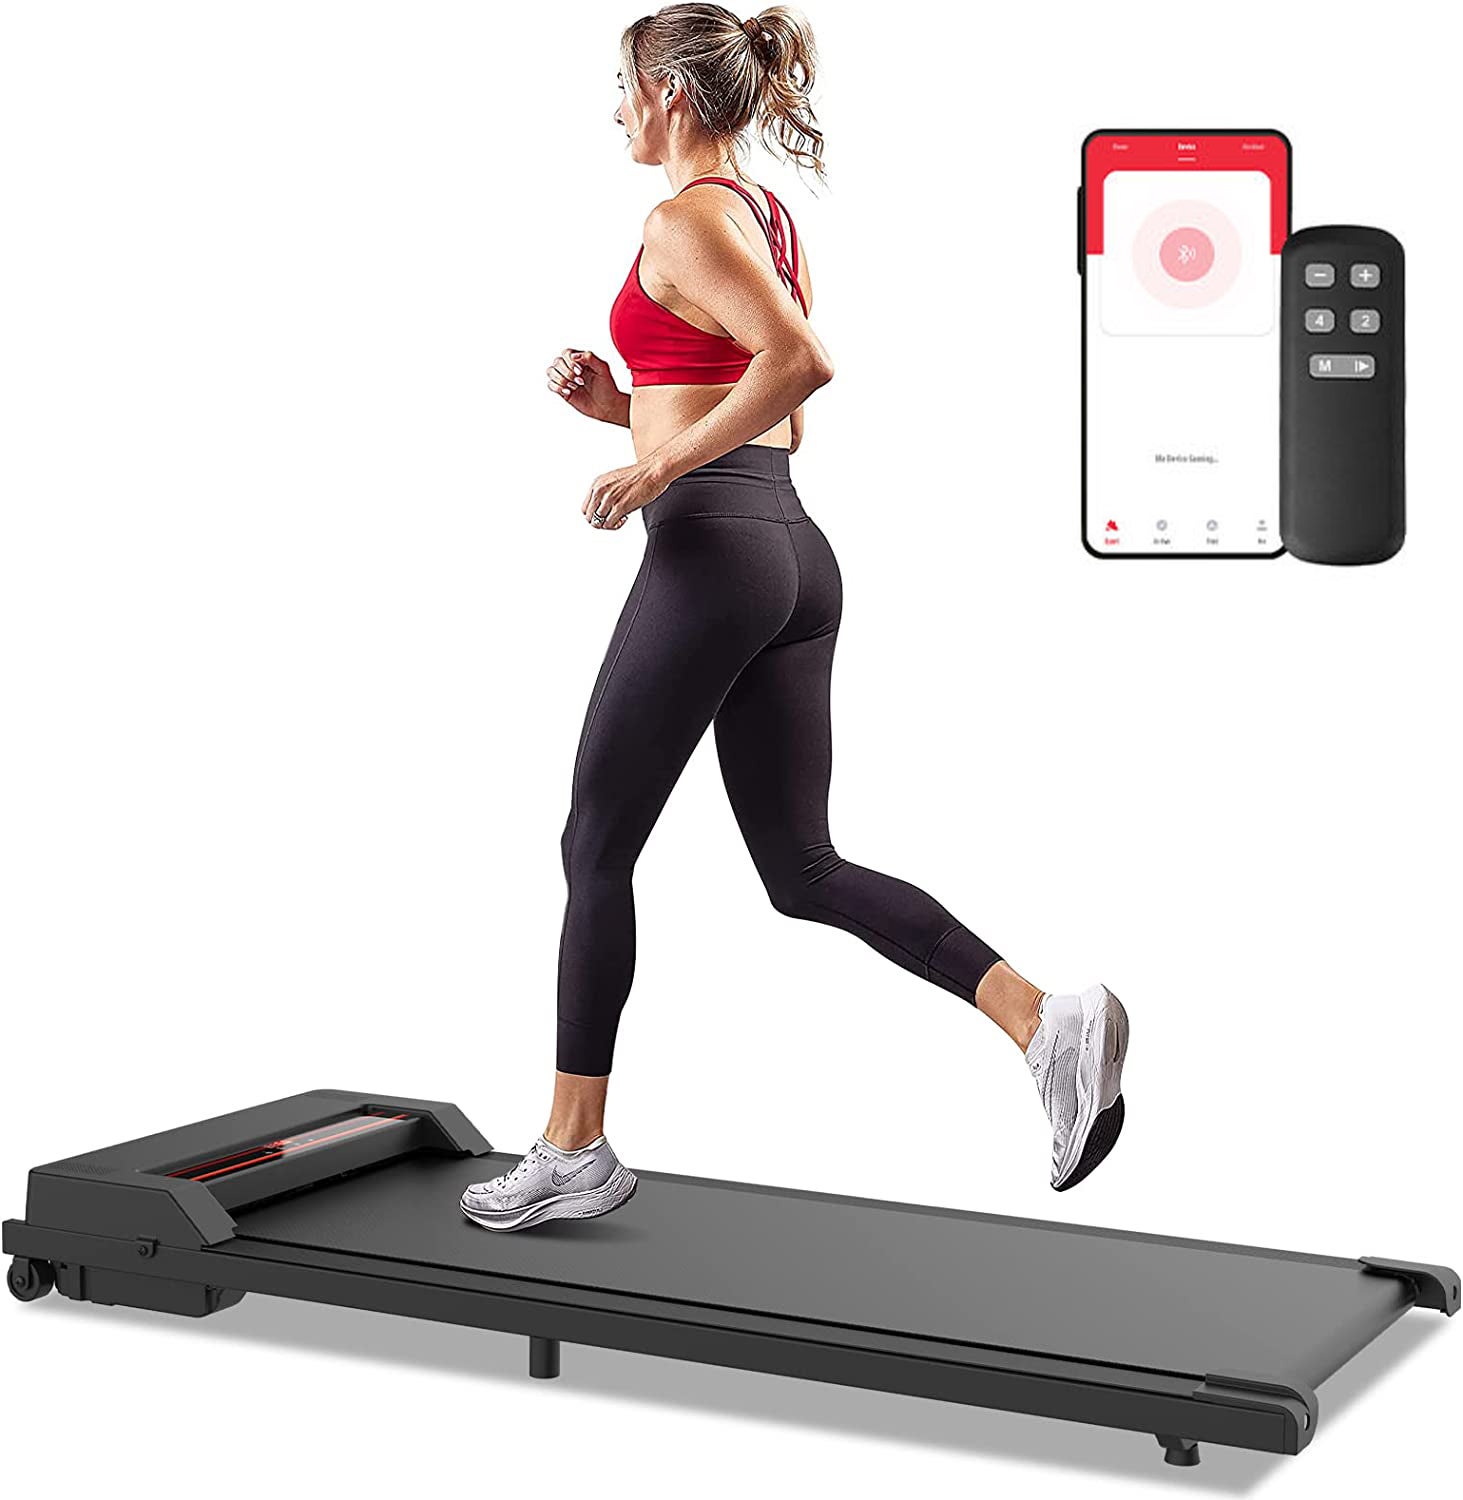 Walking Pad Treadmill Under Desk Electric Walking Machine Home Office Gym Exercise Fitness Black